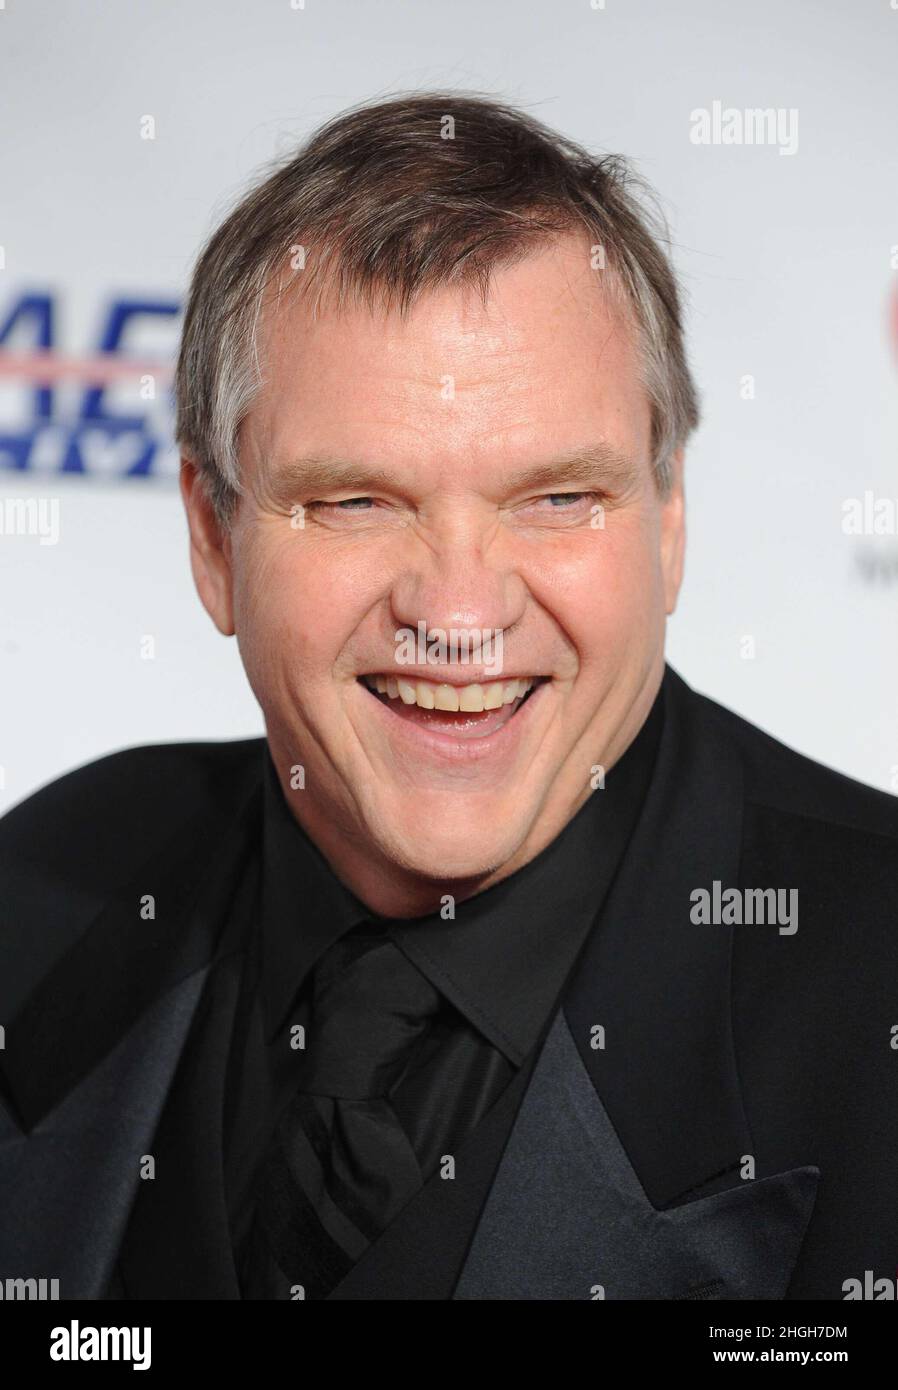 Los Angeles, USA. 06th Feb, 2009. Meatloaf. 6 February 2009, Los Angeles, CA. 2009 MusiCares Person Of The Year Honoring Neil Diamond - arrivals held at the Los Angeles Convention Center. Photo Credit: Giulio Marcocchi/Sipa Press./MusiCares gm.106/0902070909 Credit: Sipa USA/Alamy Live News Stock Photo